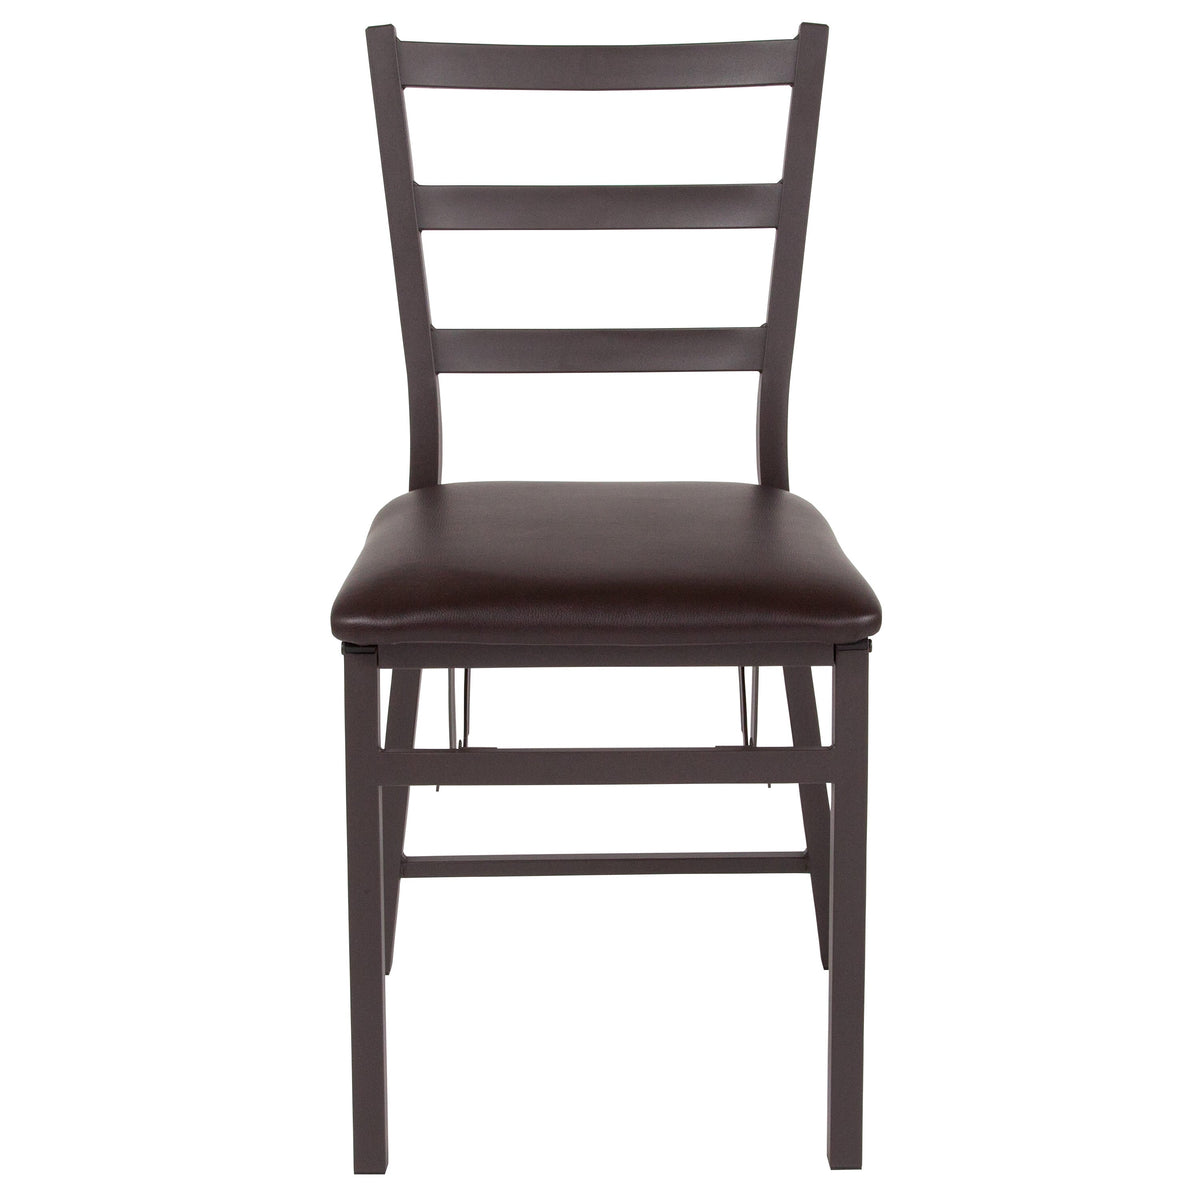 Brown Folding Ladder Back Metal Chair with Brown Vinyl Seat - Dining Furniture